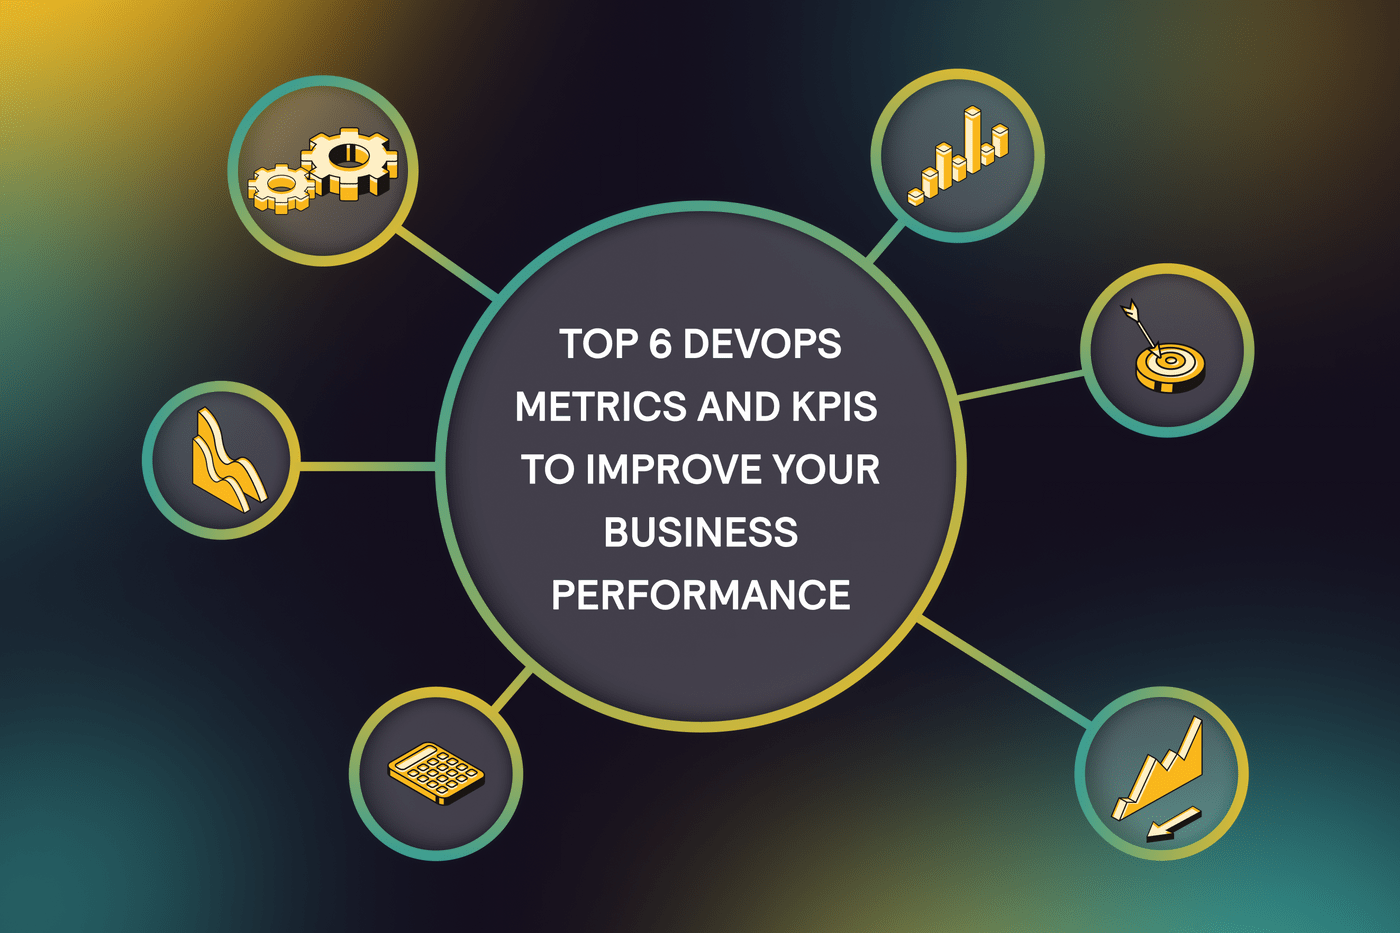 Top 6 DevOps Metrics and KPIs to Improve Your Business Performance thumbnail